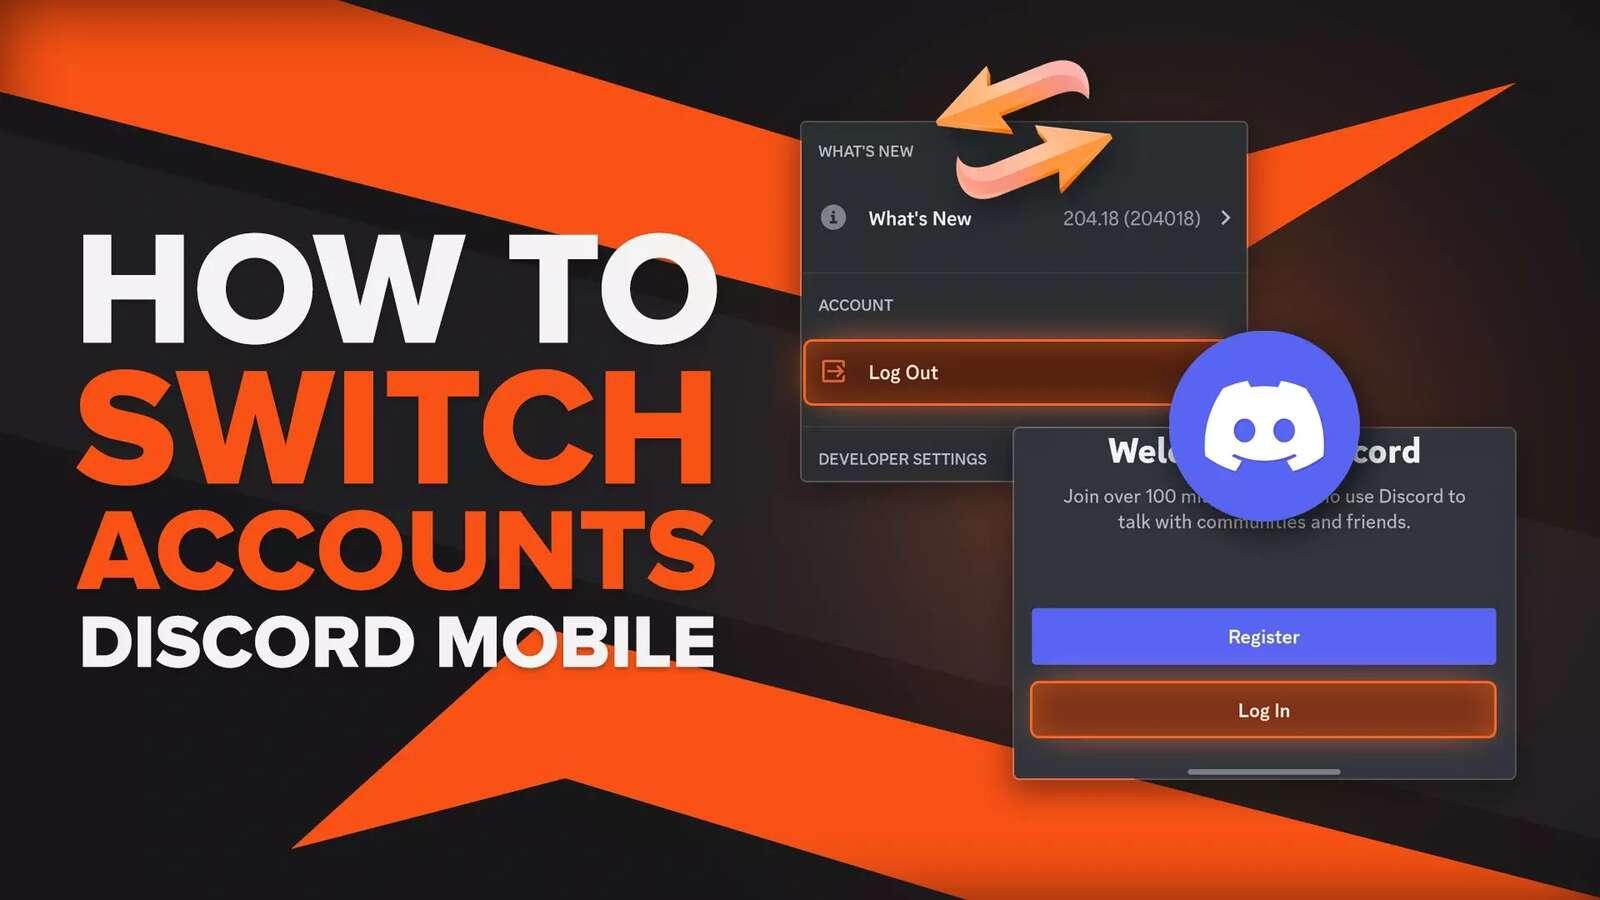 How To Switch Accounts On Discord Mobile? [With Pictures]